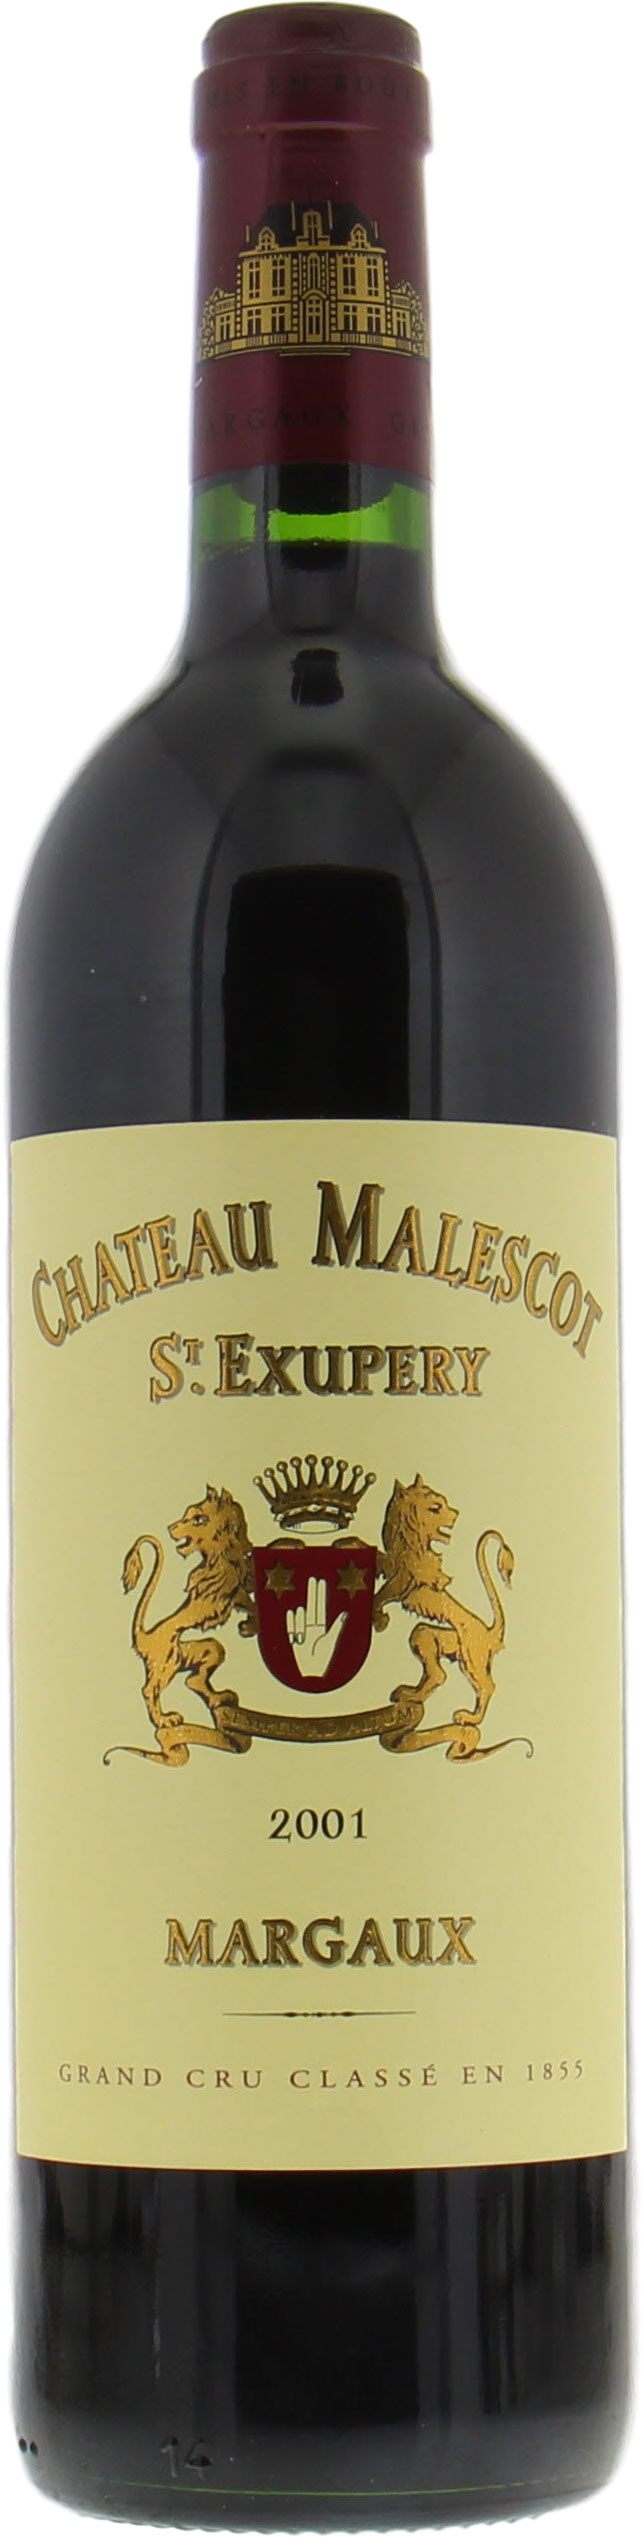 Chateau Malescot-St-Exupery - Chateau Malescot-St-Exupery 2001 From Original Wooden Case